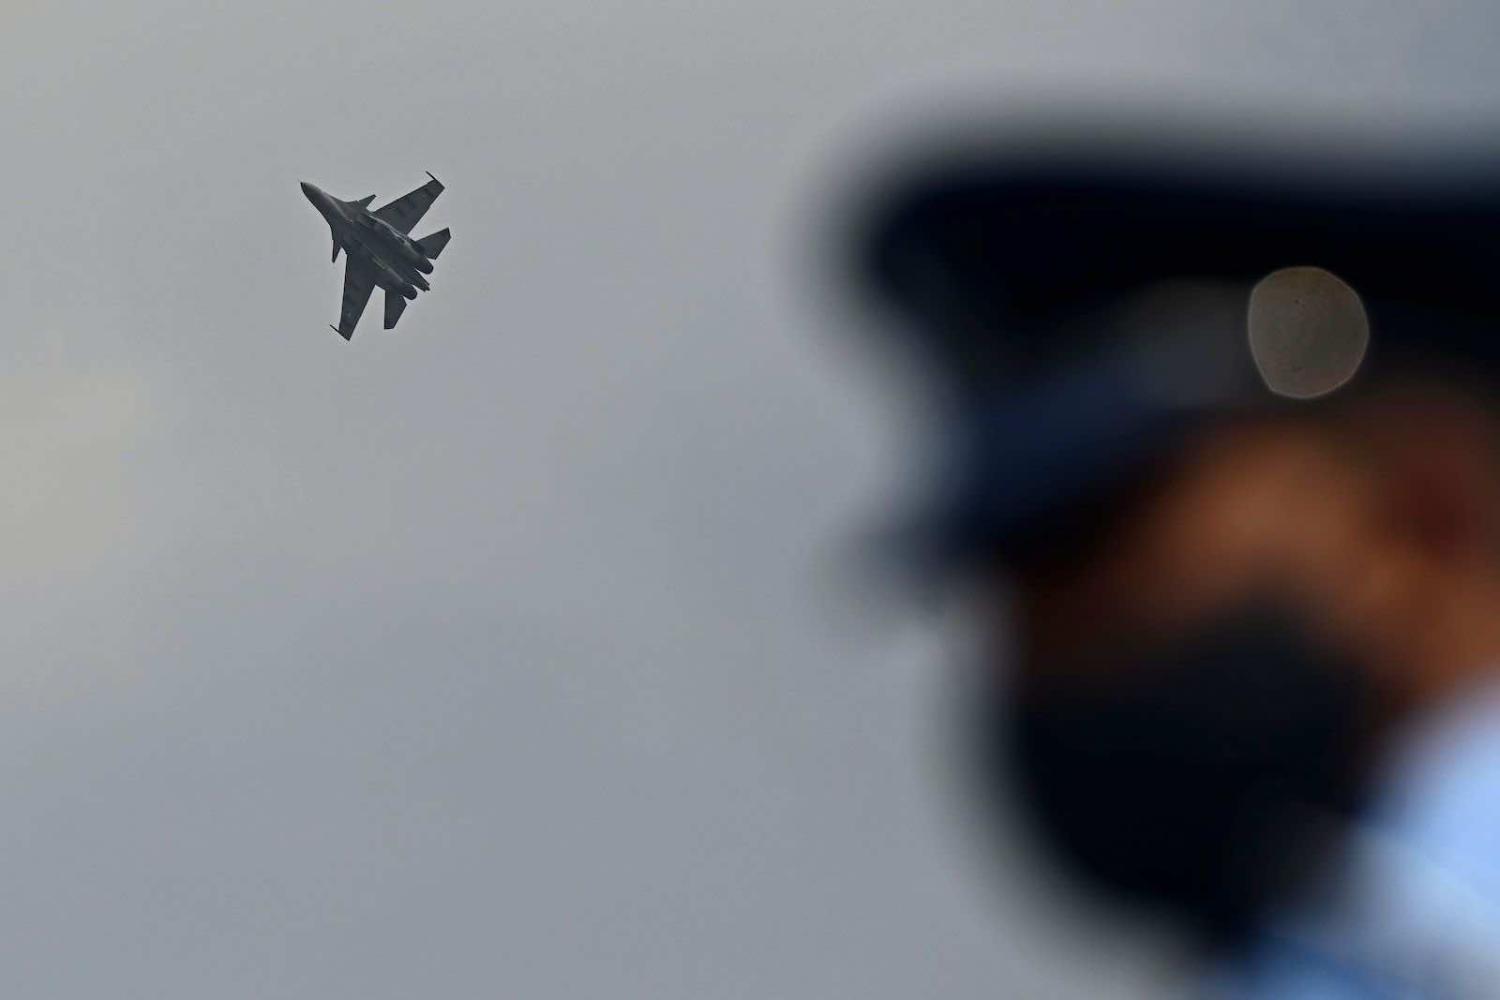 India depends on Russia for maintenance and spares for front-line Su-30MKI fighters as well as other materiel (Jewel Samad/ AFP via Getty Images)